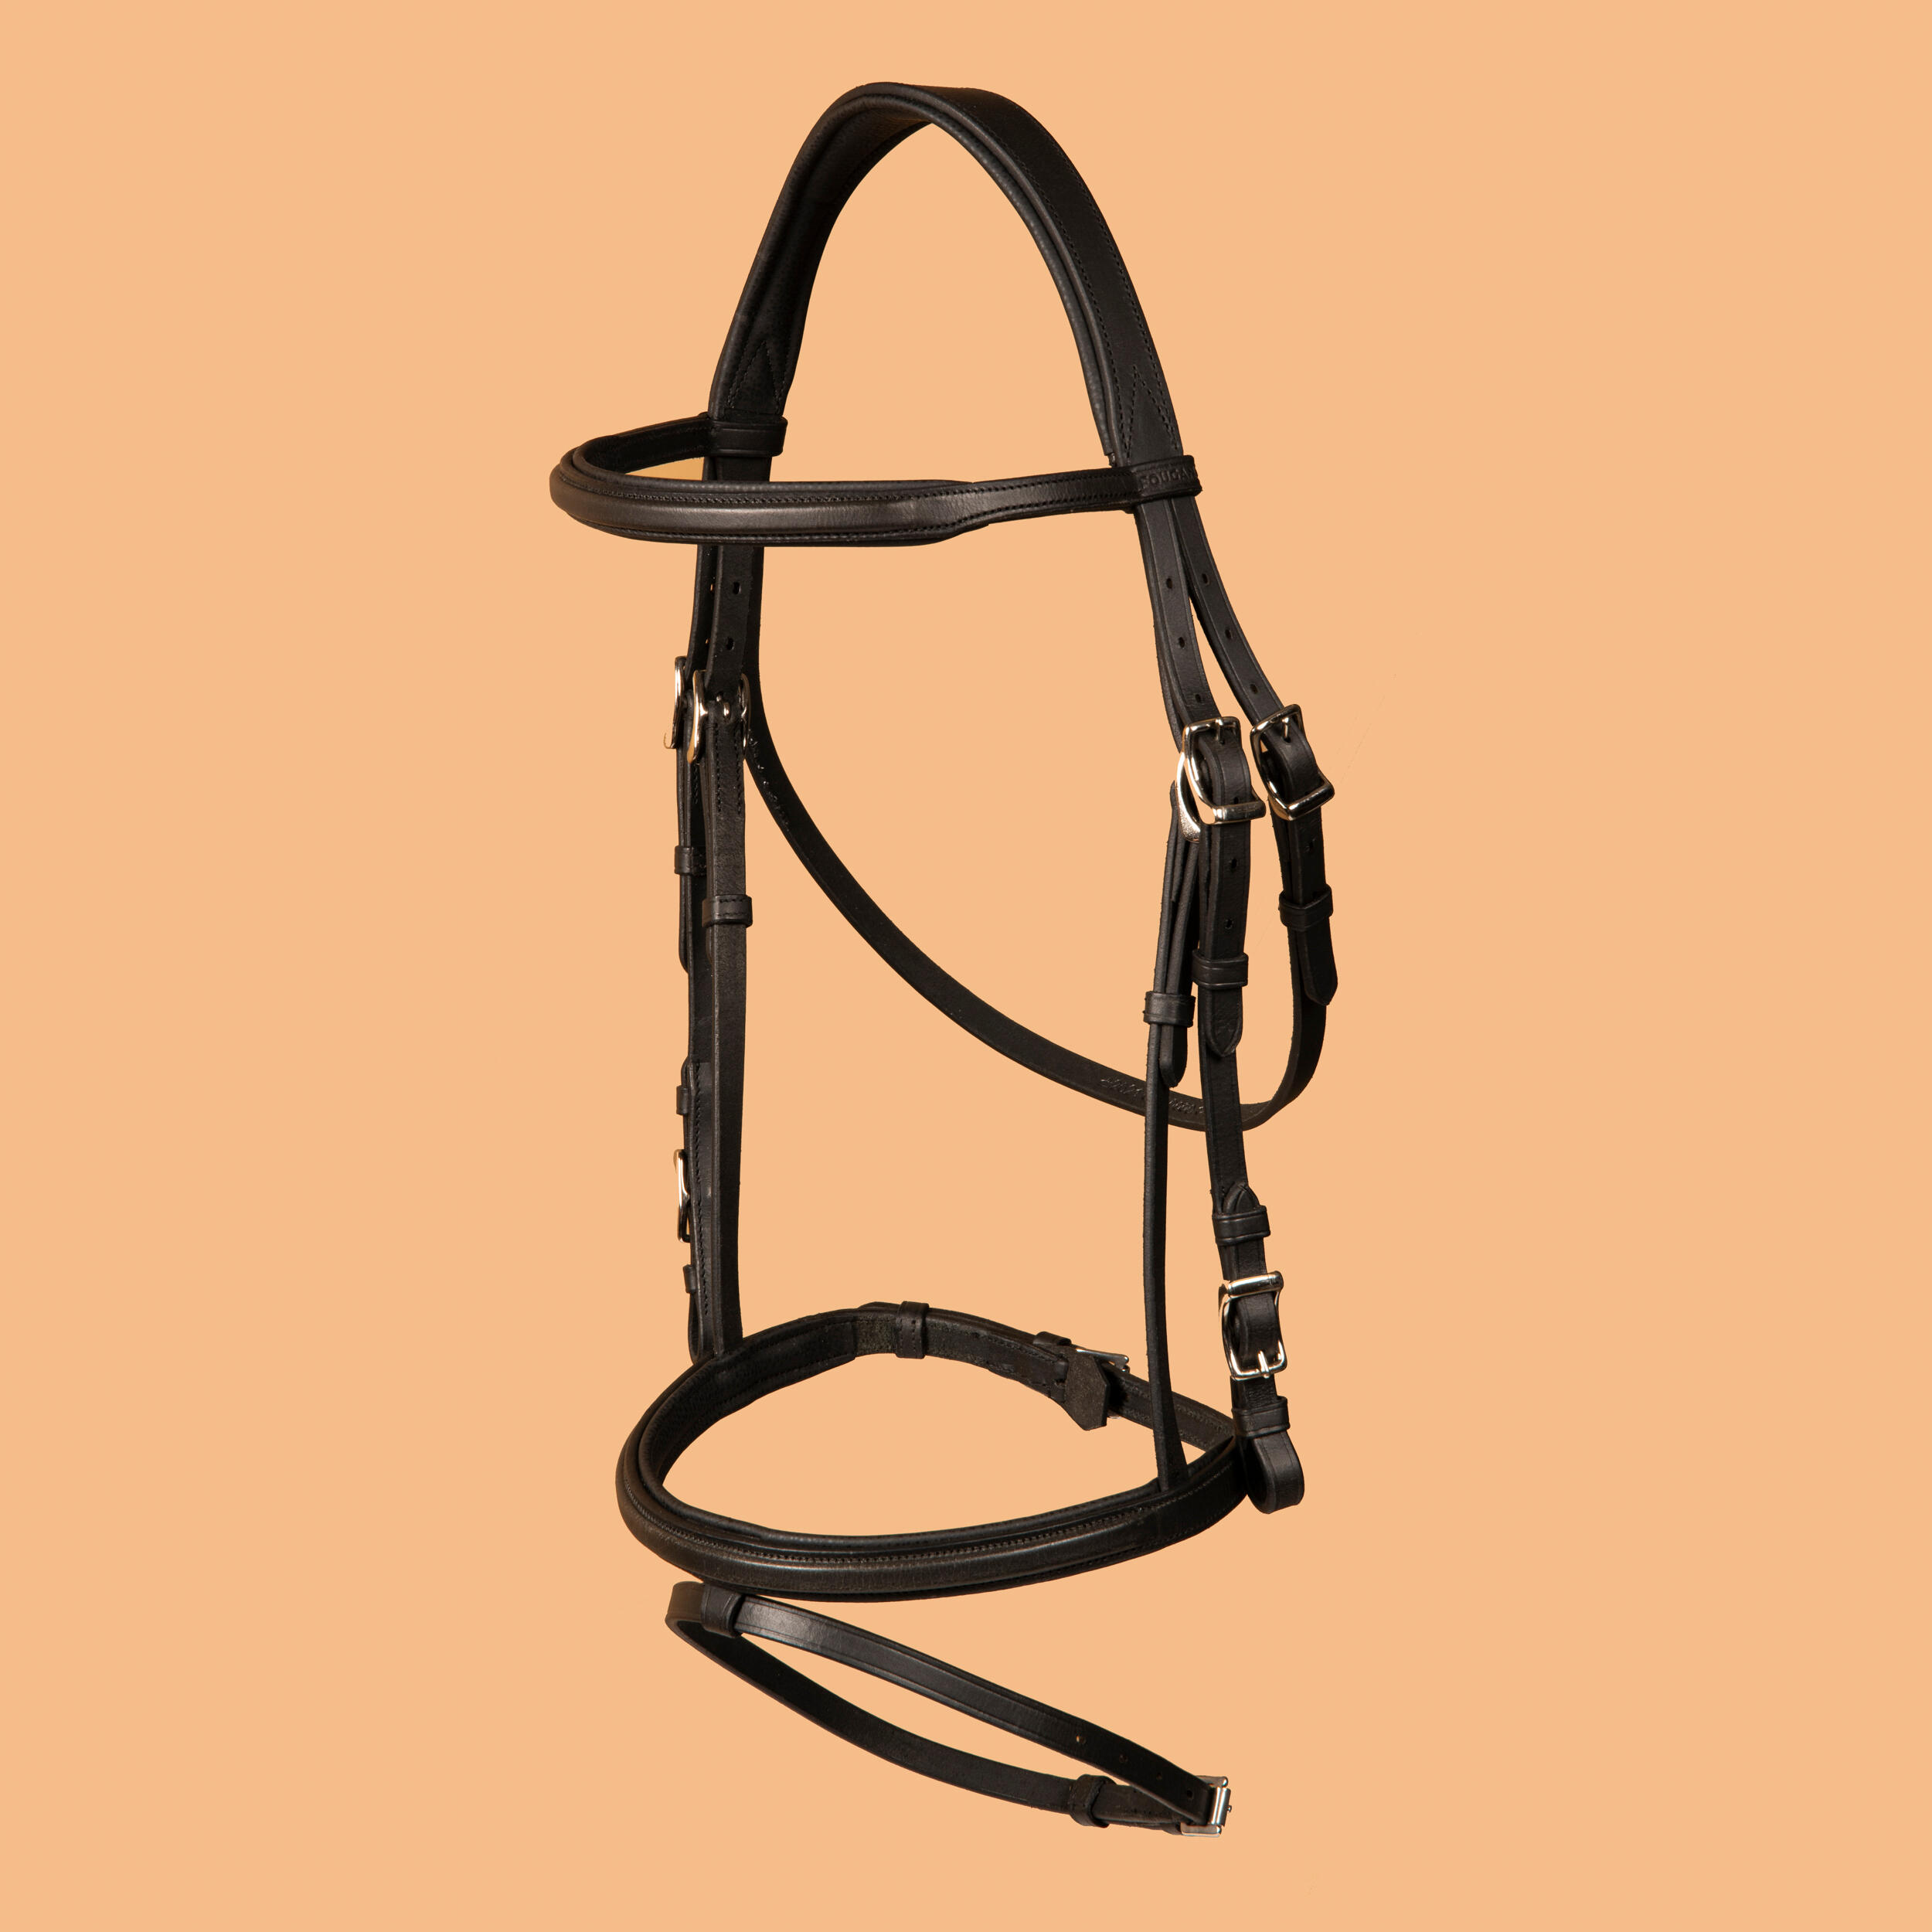 FOUGANZA Horse Riding Leather Hybrid Bridle With French Noseband For Horse & Pony 500